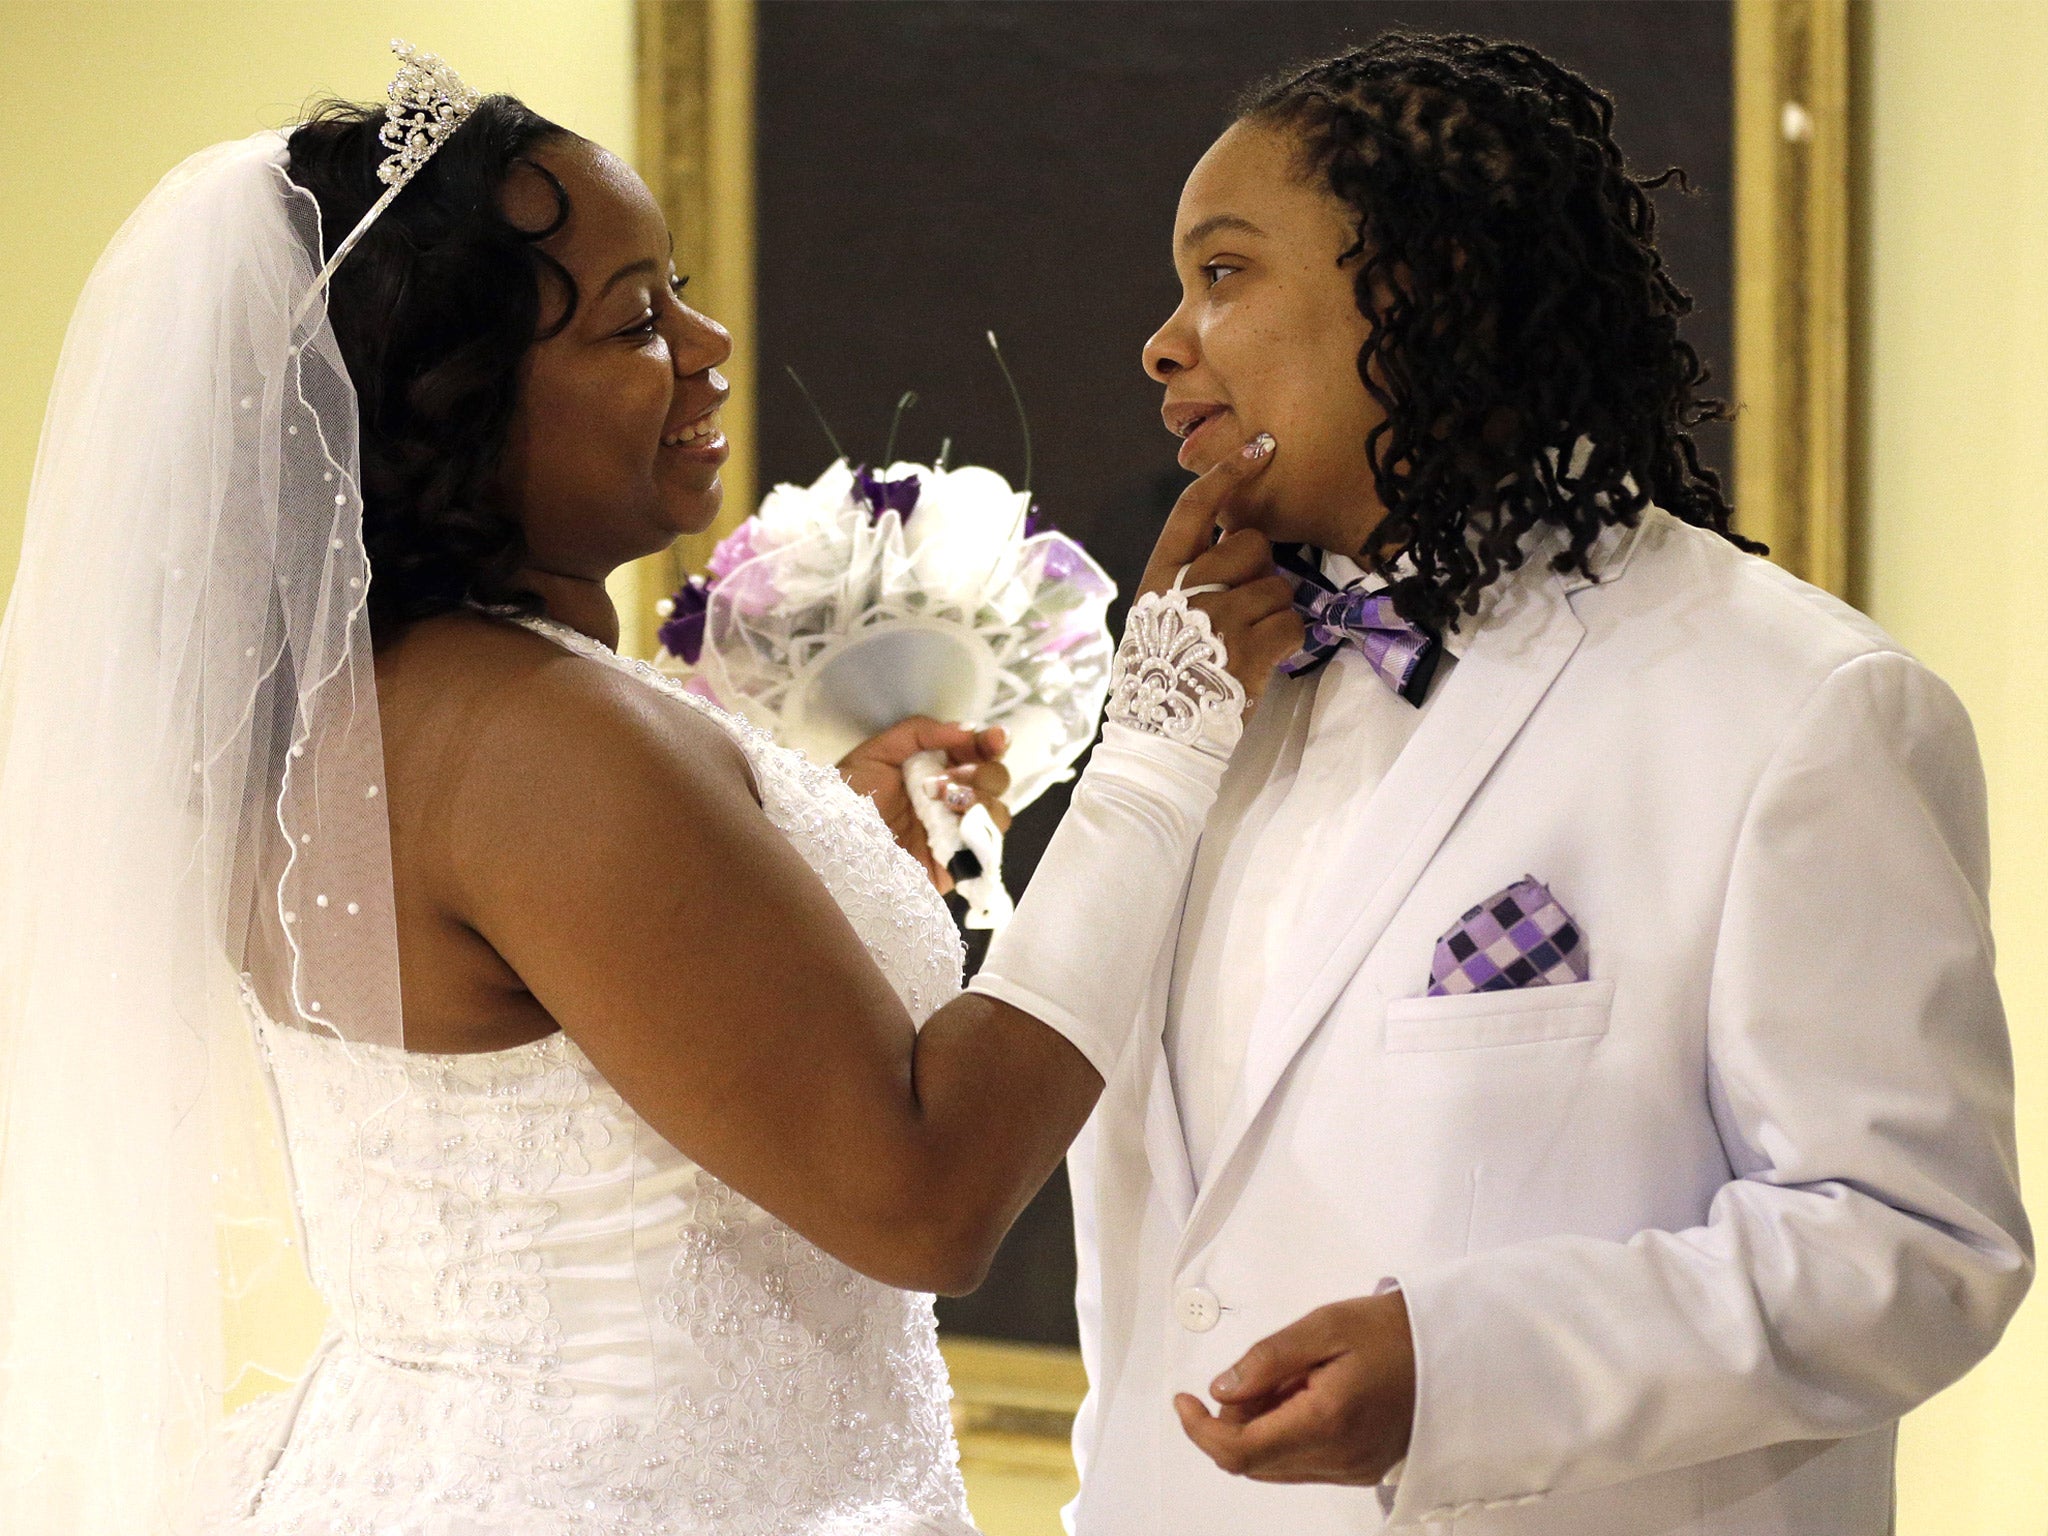 Darcia Anthony, left, and Danielle Williams chat before their wedding at City Hall in Baltimore